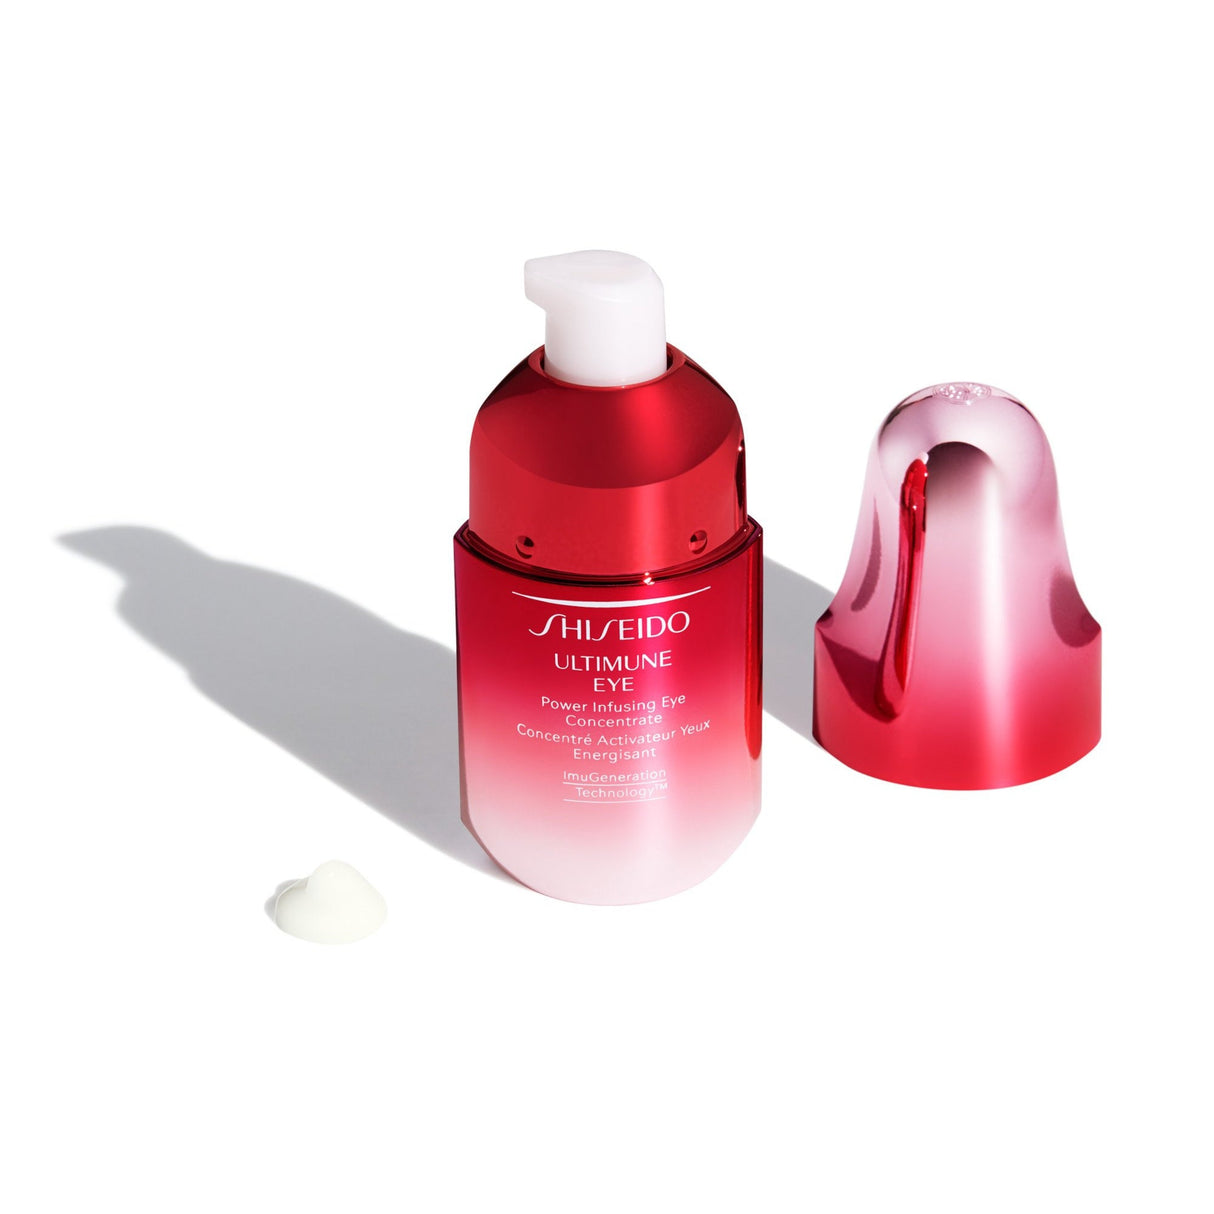 Ultimune Eye Power Infusing Concentrate-Shiseido